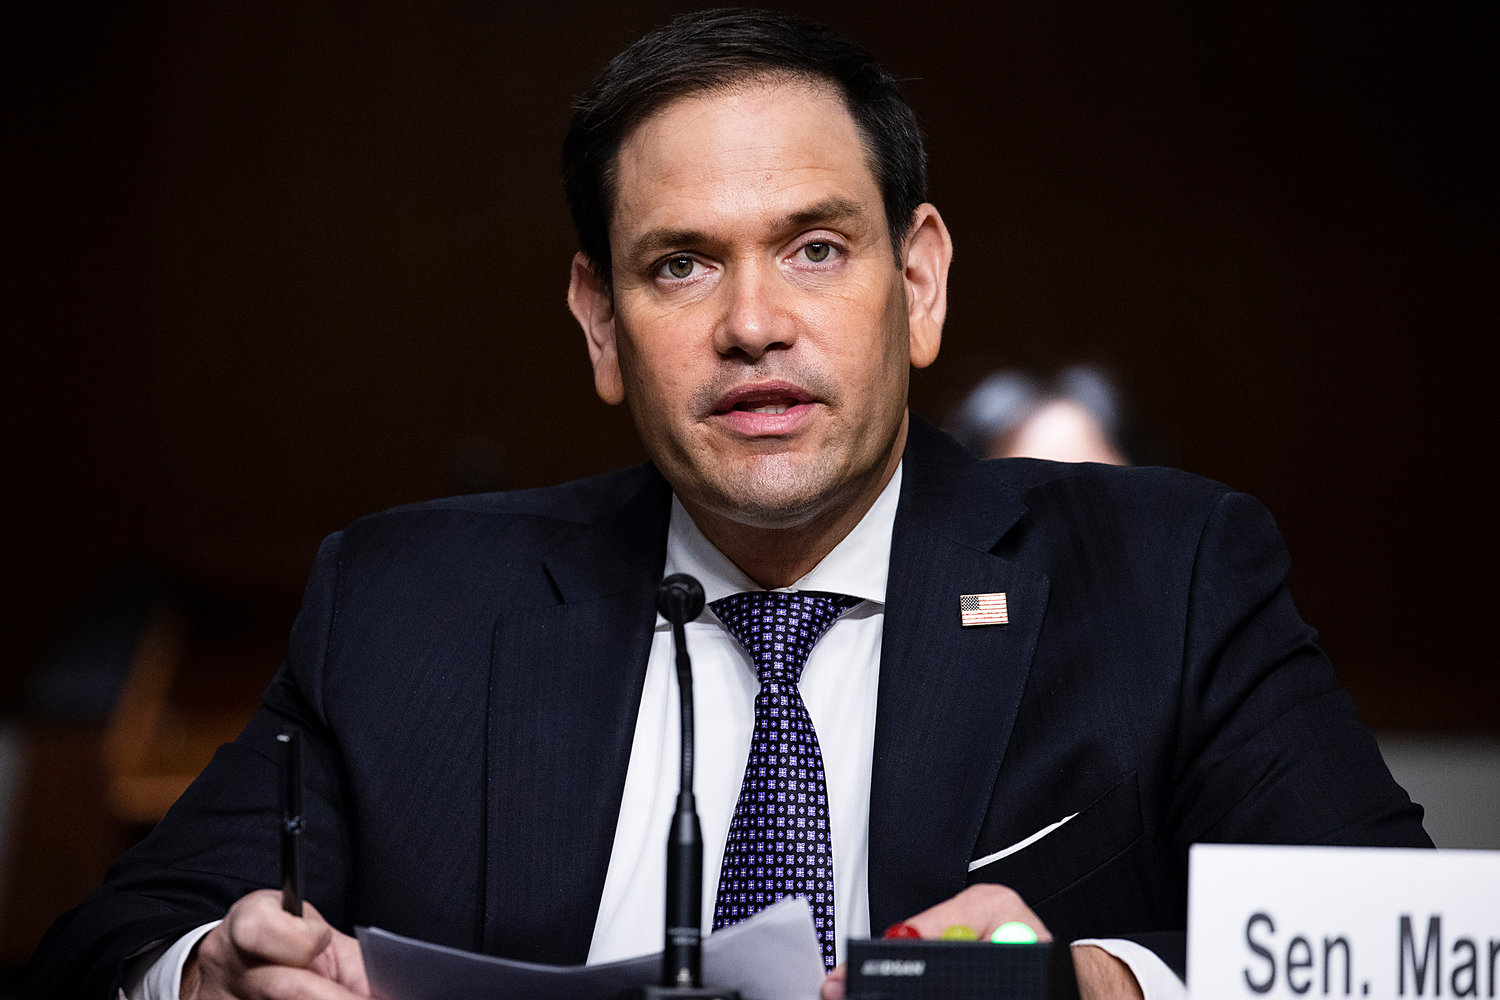 Sen. Marco Rubio, R-Fla., speaks on Capitol Hill on Dec. 16, 2020. Along with Wisconsin Sen. Ron Johnson, Rubio is among the highly challenged Senate Republicans seeking reelection.